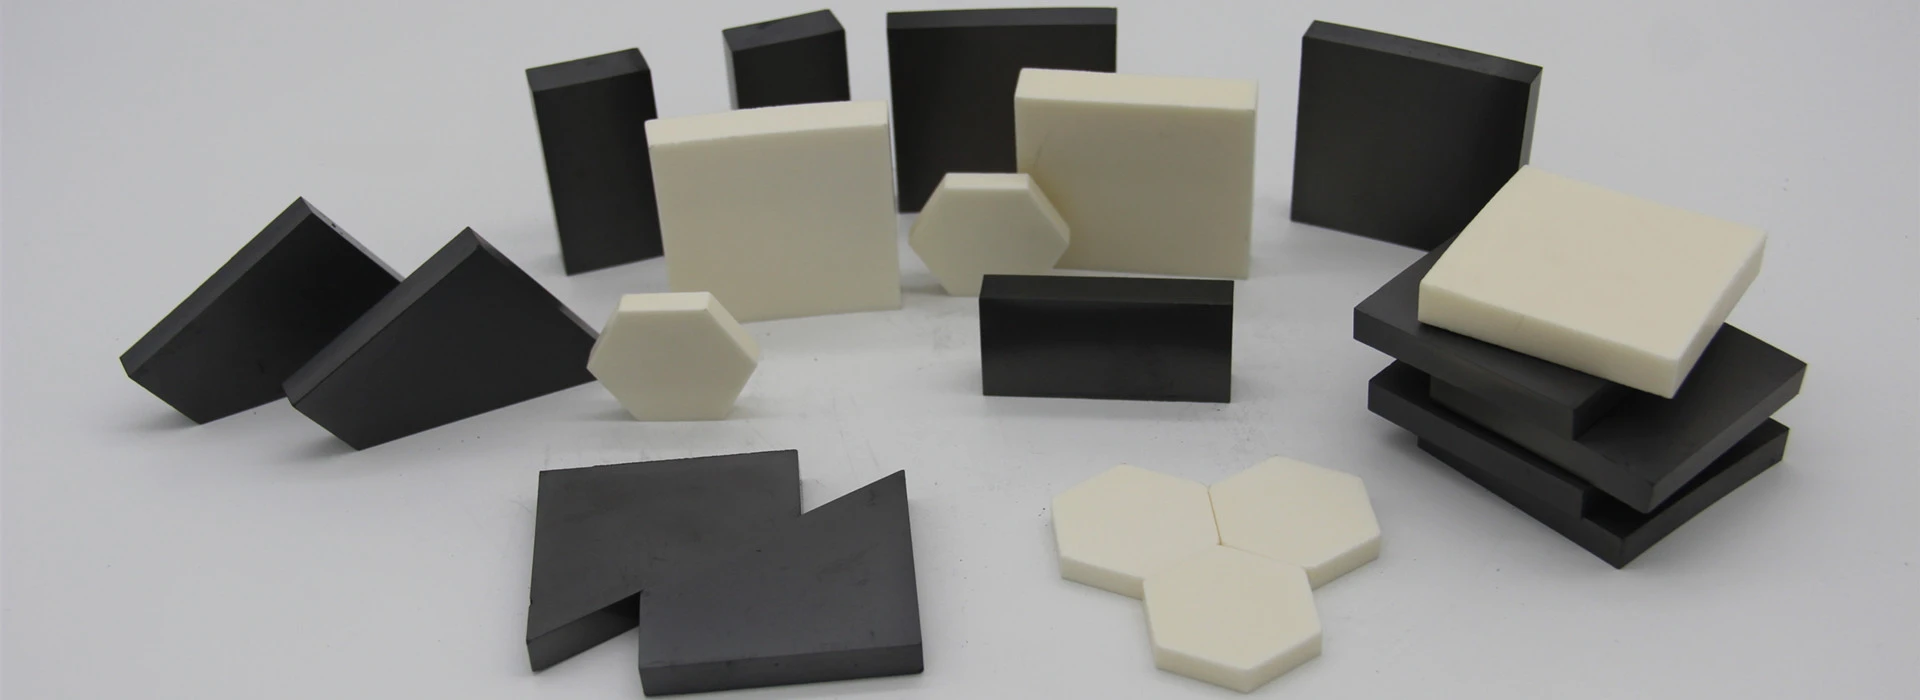 KETAO offers lightweight, top-quality armor ceramic in a wide variety of shapes, sizes, thikcness